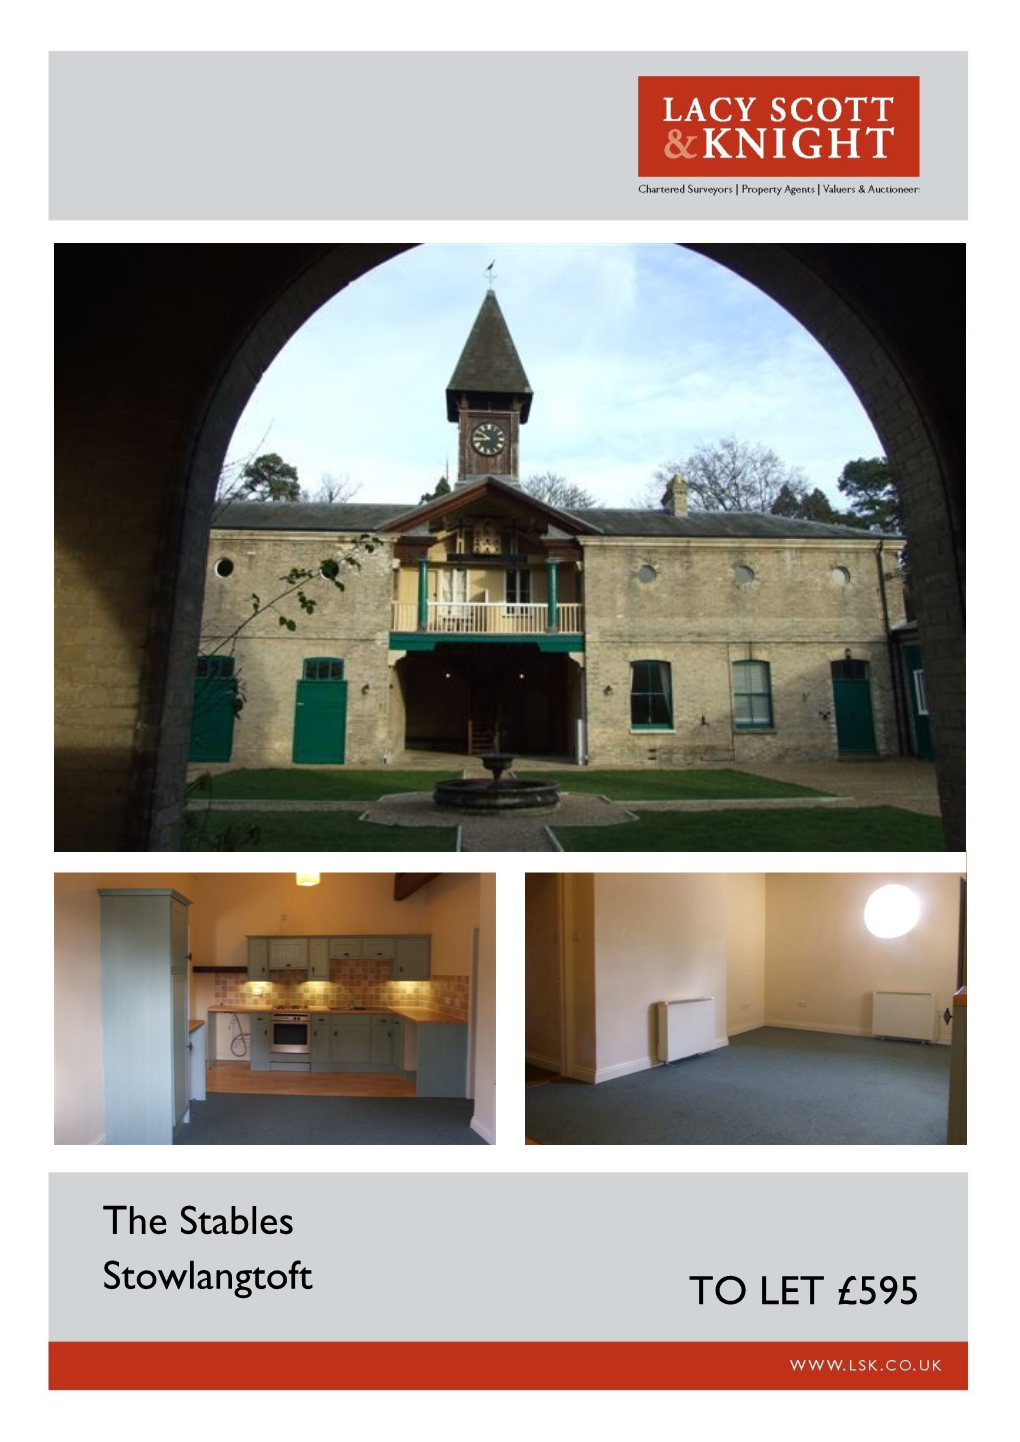 The Stables Stowlangtoft to LET £595